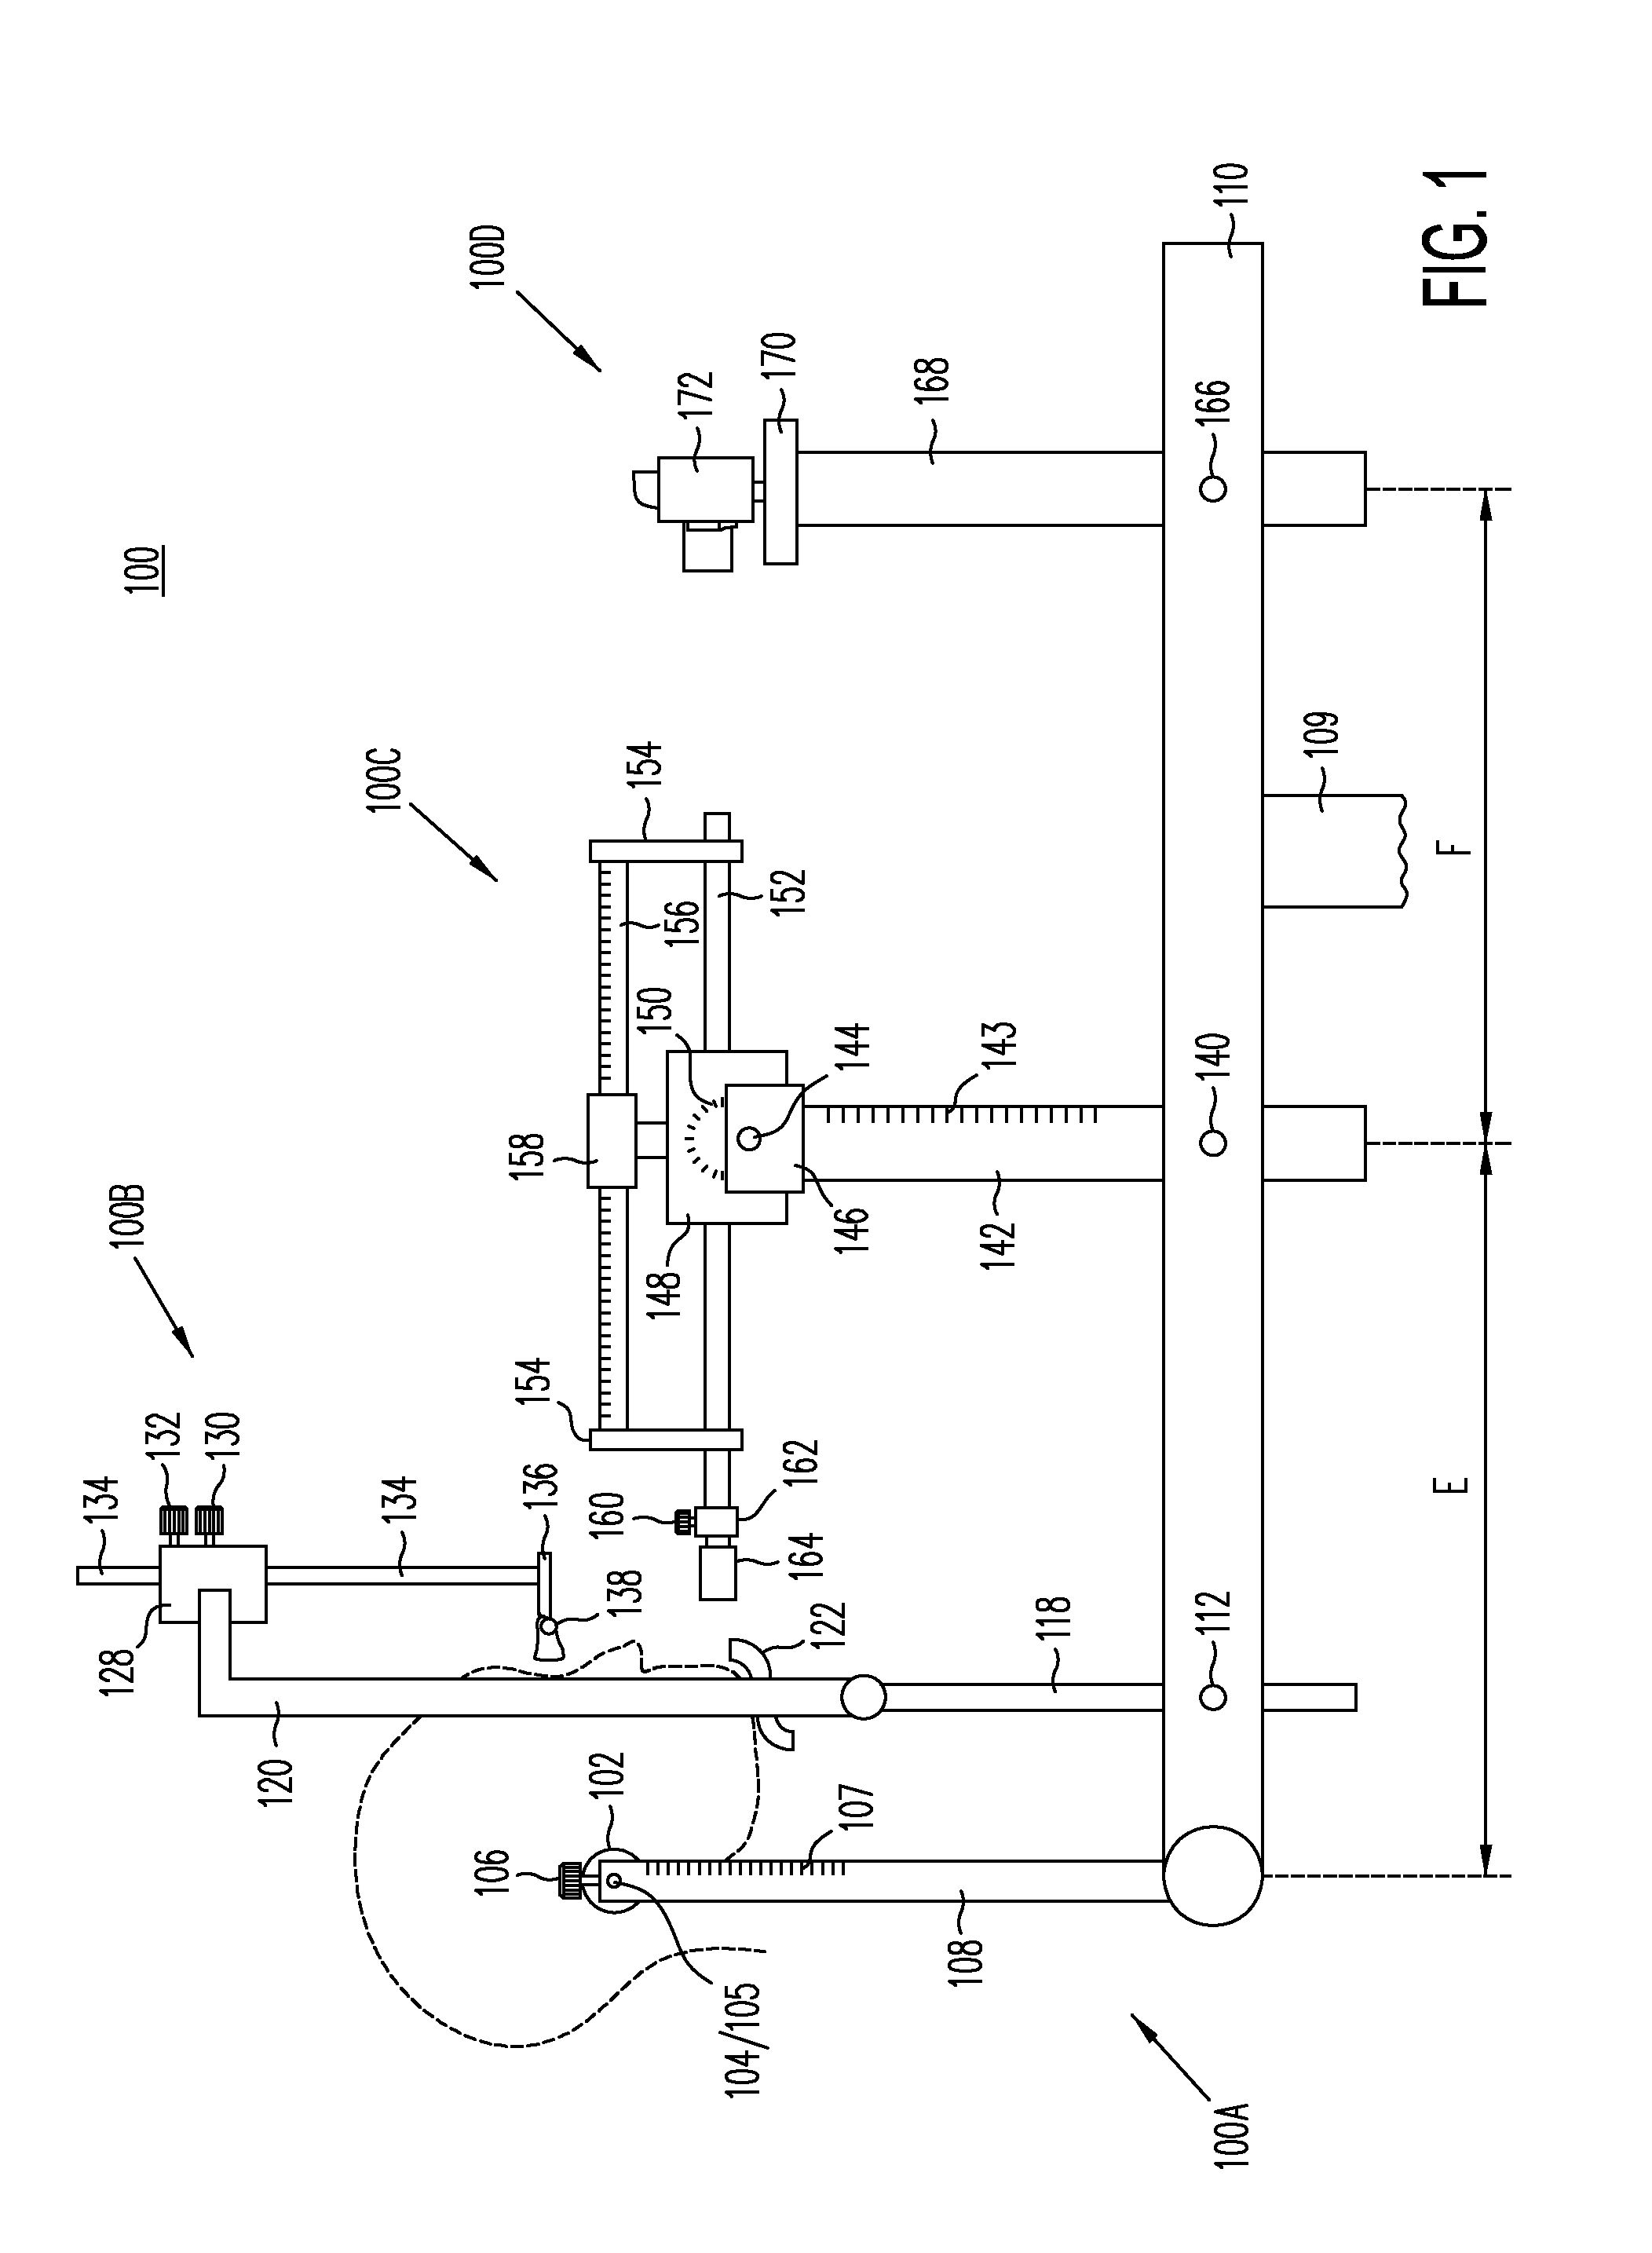 Apparatus and method for use in creating dental prosthetics